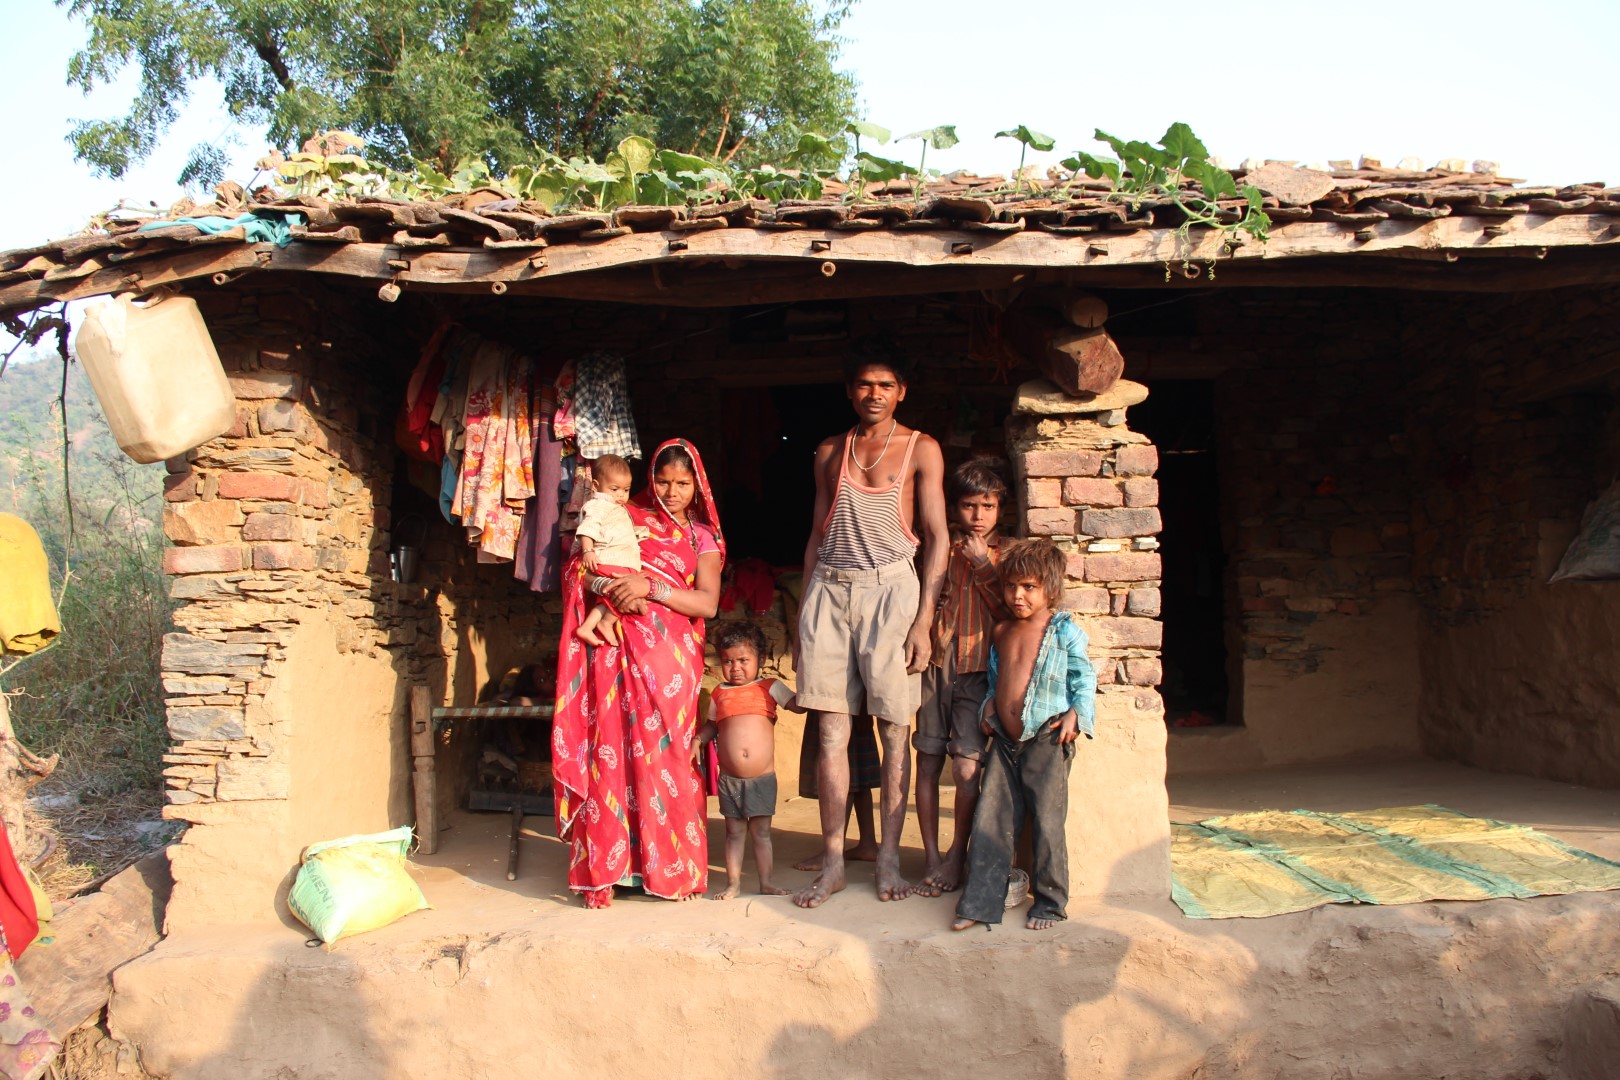 Family in front of their house